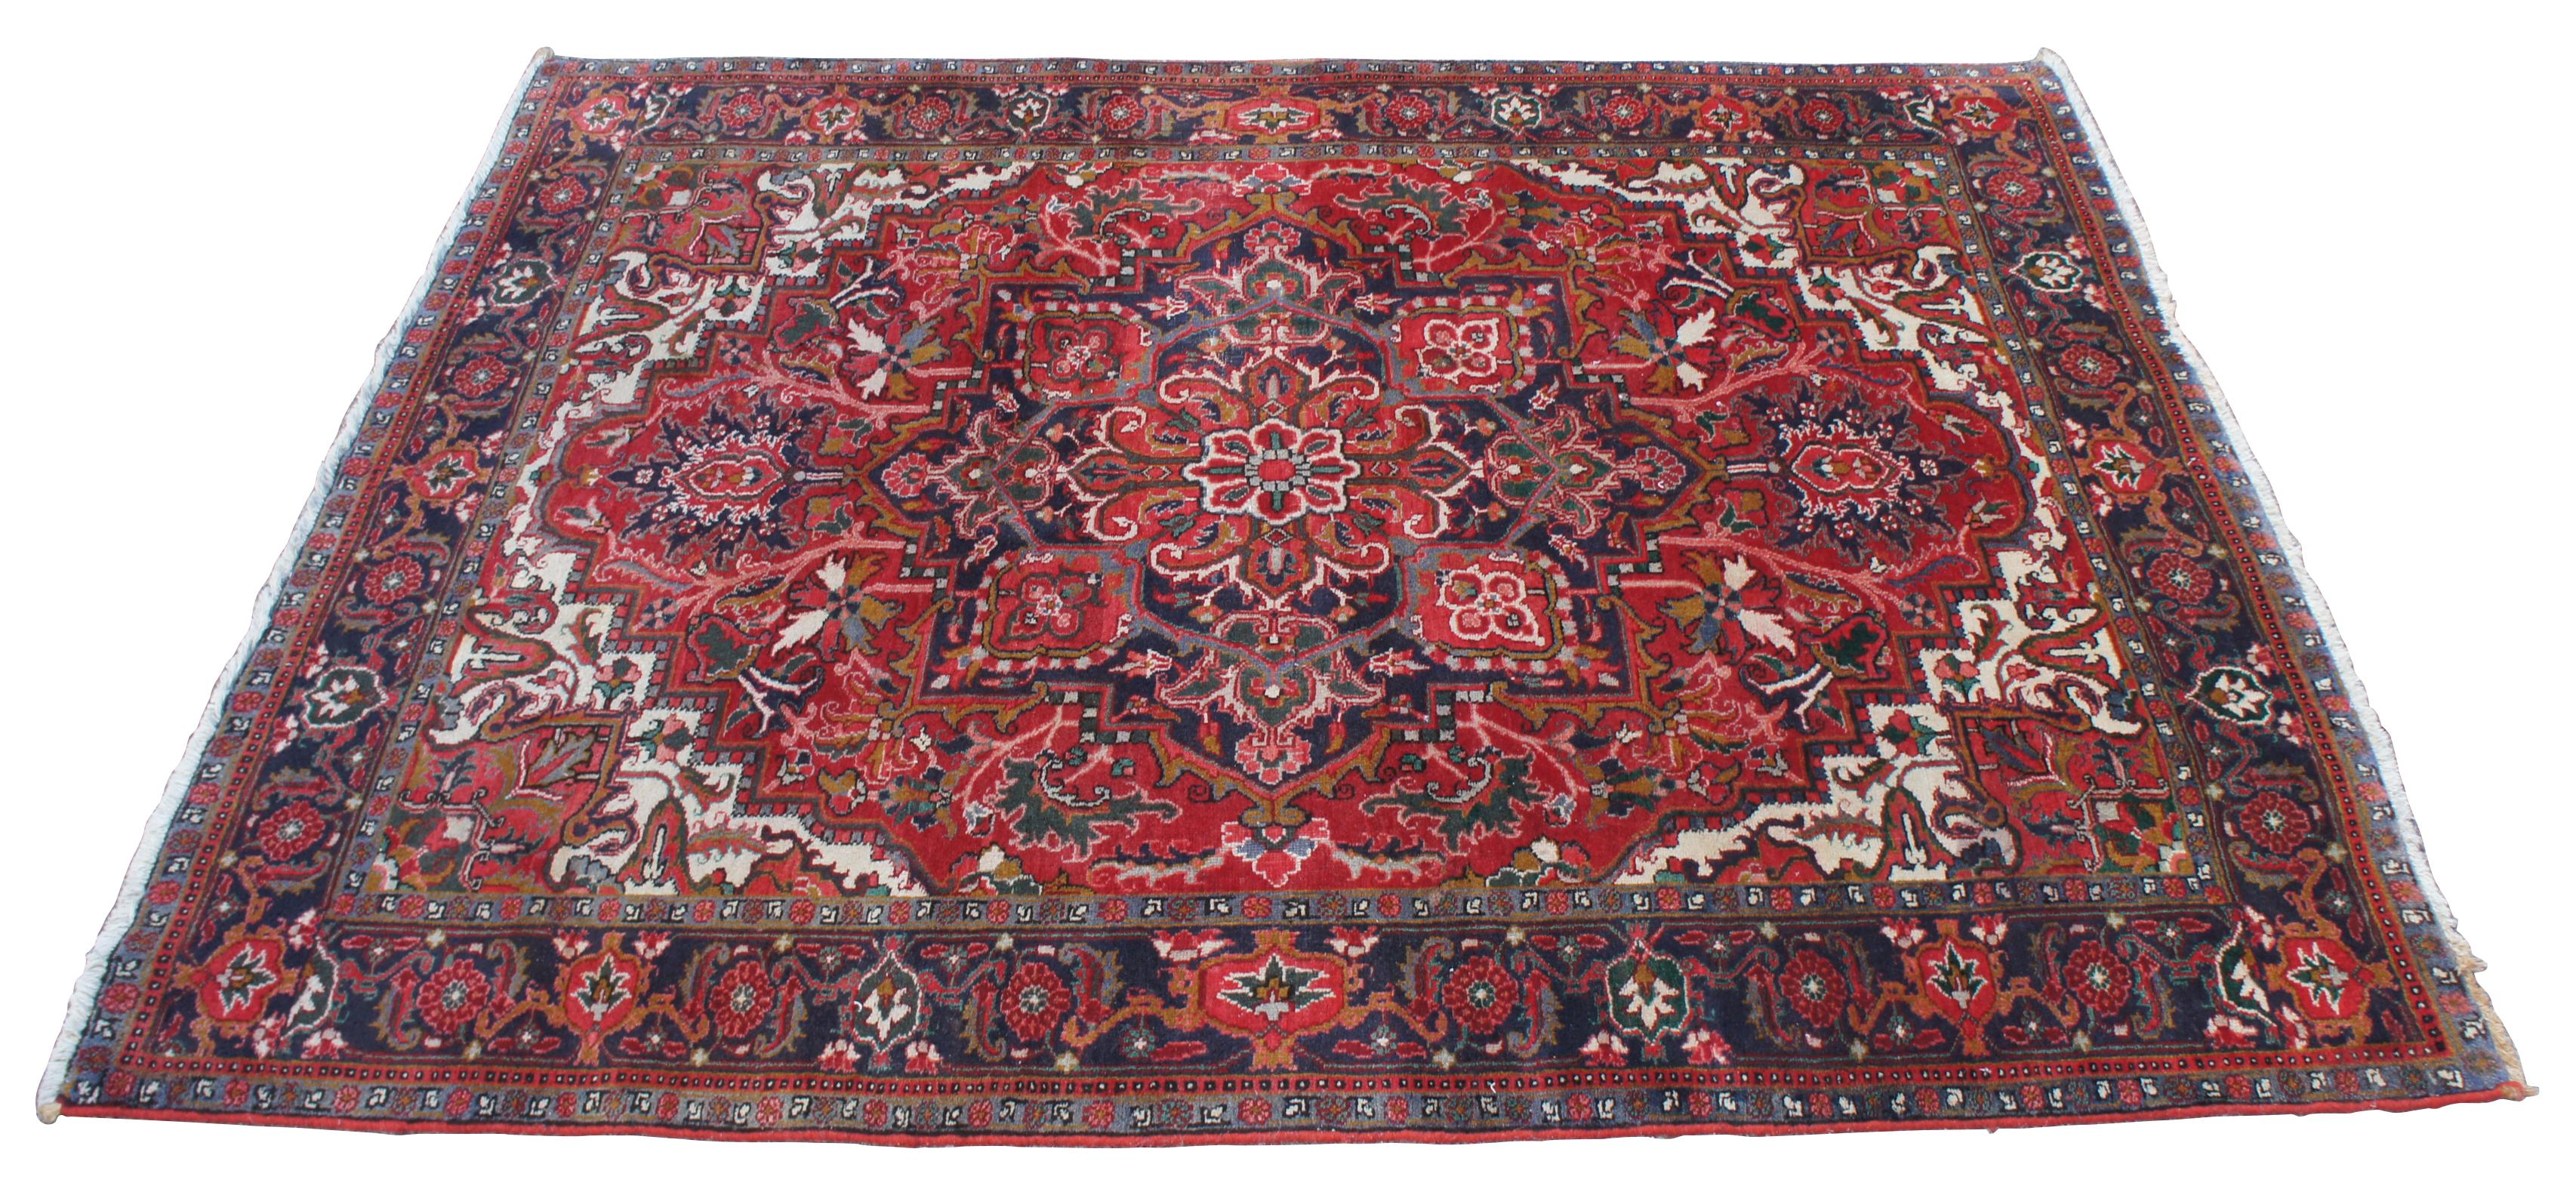 Vintage 1985 Bakhtiar area rug. Made in Iran of 100% wool, featuring a large central medallion with an flloral motif over a field of reds with blues / teal, tans, pinks, greens, brown / gold, and indigo / purple. Measures: 6.5' x 9'.
  